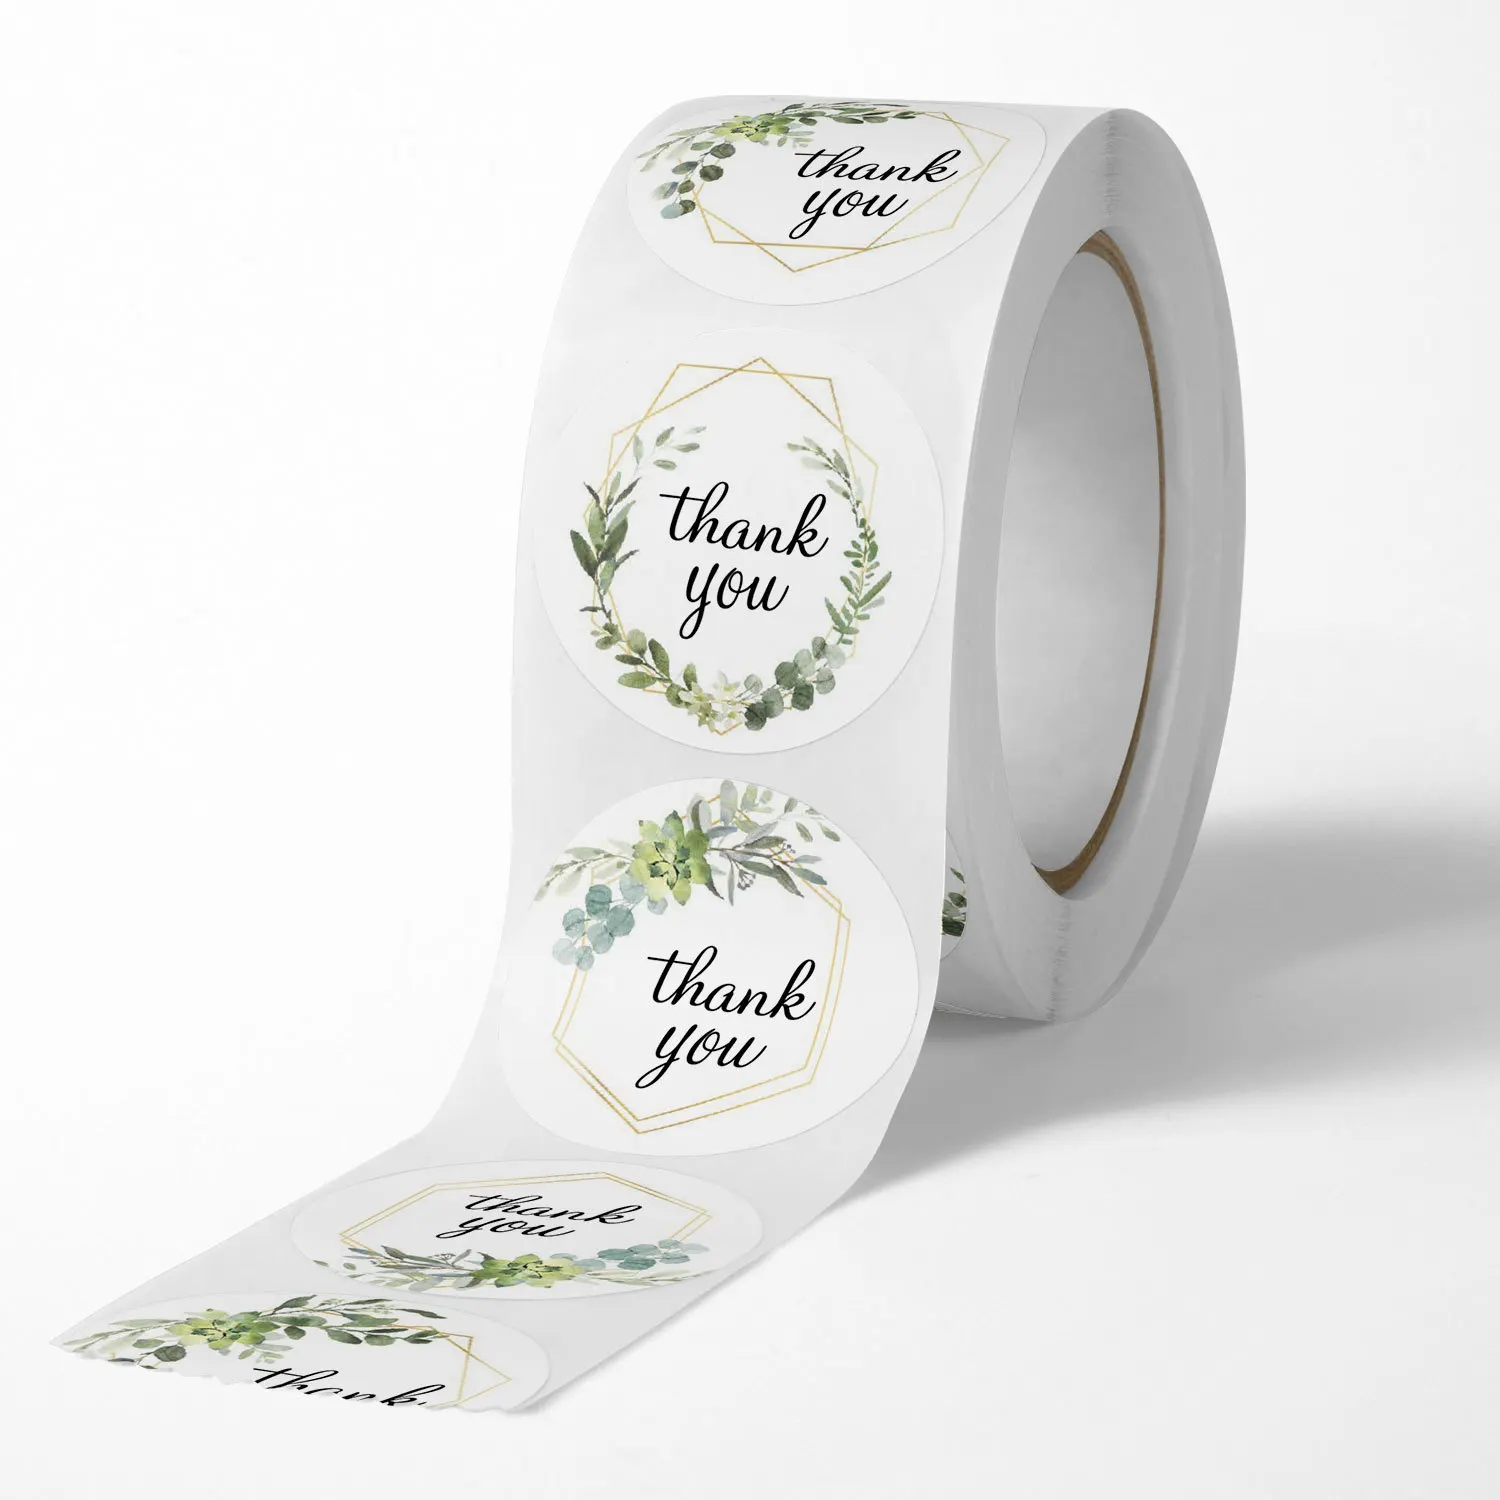 Flower White Customer Mailer & Retail Bag Set of 2, 1000 pcs Thank You Stickers Roll 2.5 cm / 1 inch Small Self Adhesive Label Roll Boutique Supplies for Business Letter Unihom Gift Packaging 